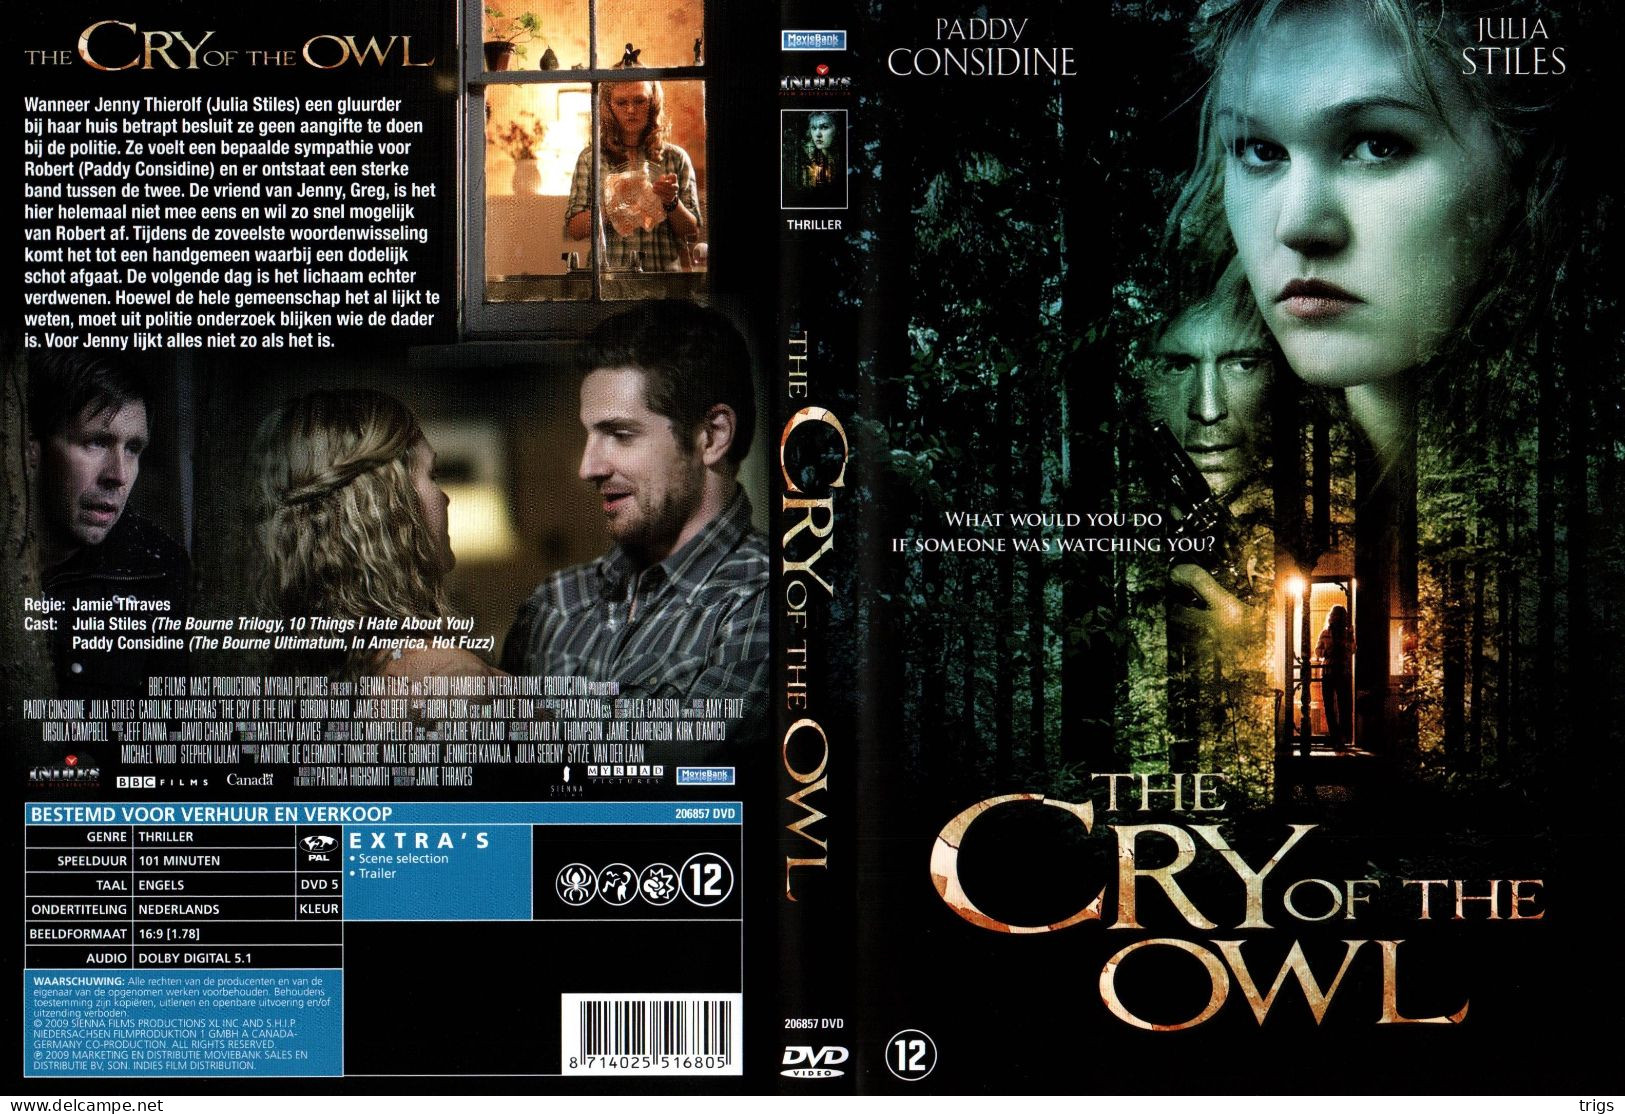 DVD - The Cry Of The Owl - Krimis & Thriller